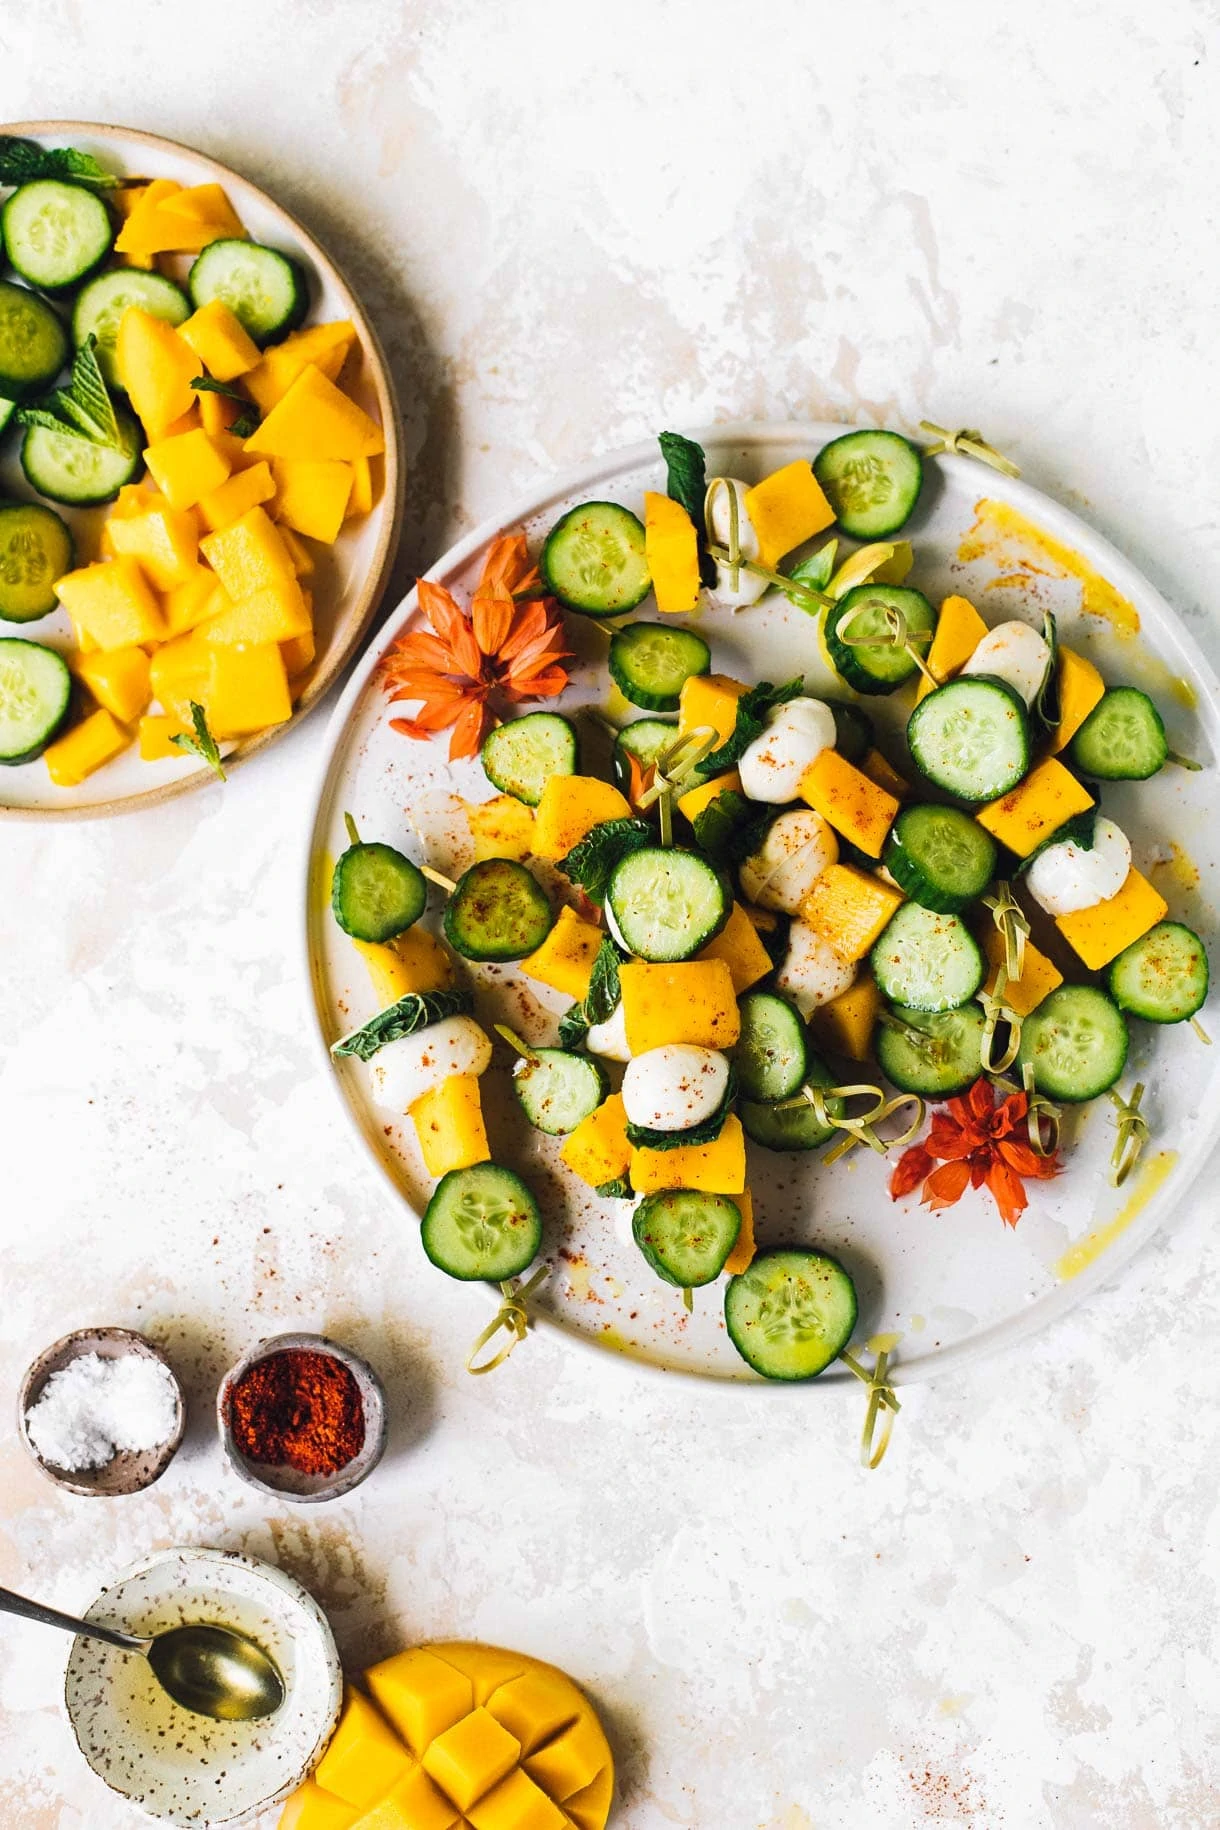 mango mozzarella cucumber skewers on a plate, with bowl of salt and white balsamic vinegar next to it